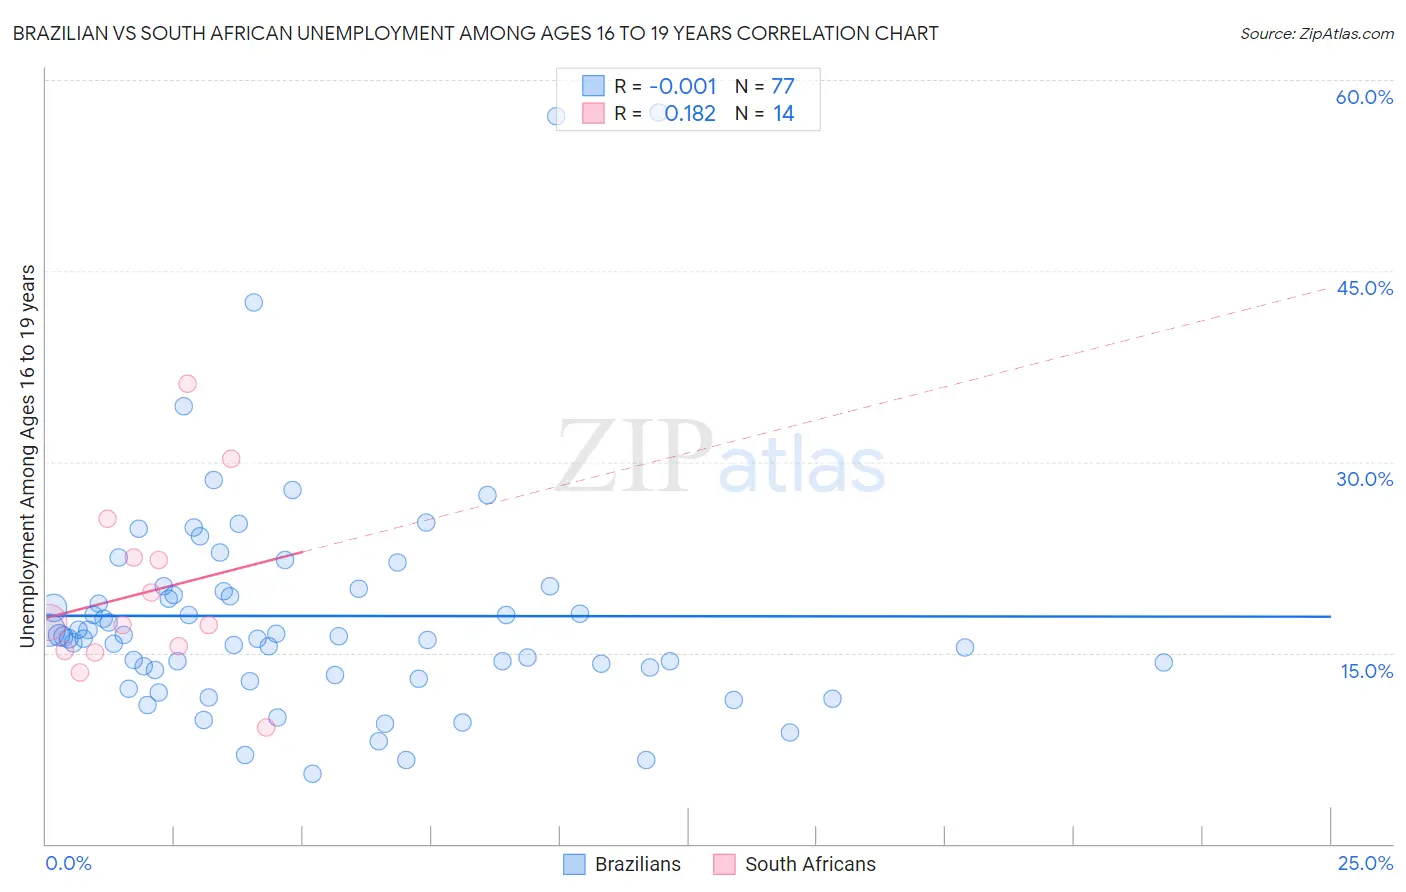 Brazilian vs South African Unemployment Among Ages 16 to 19 years